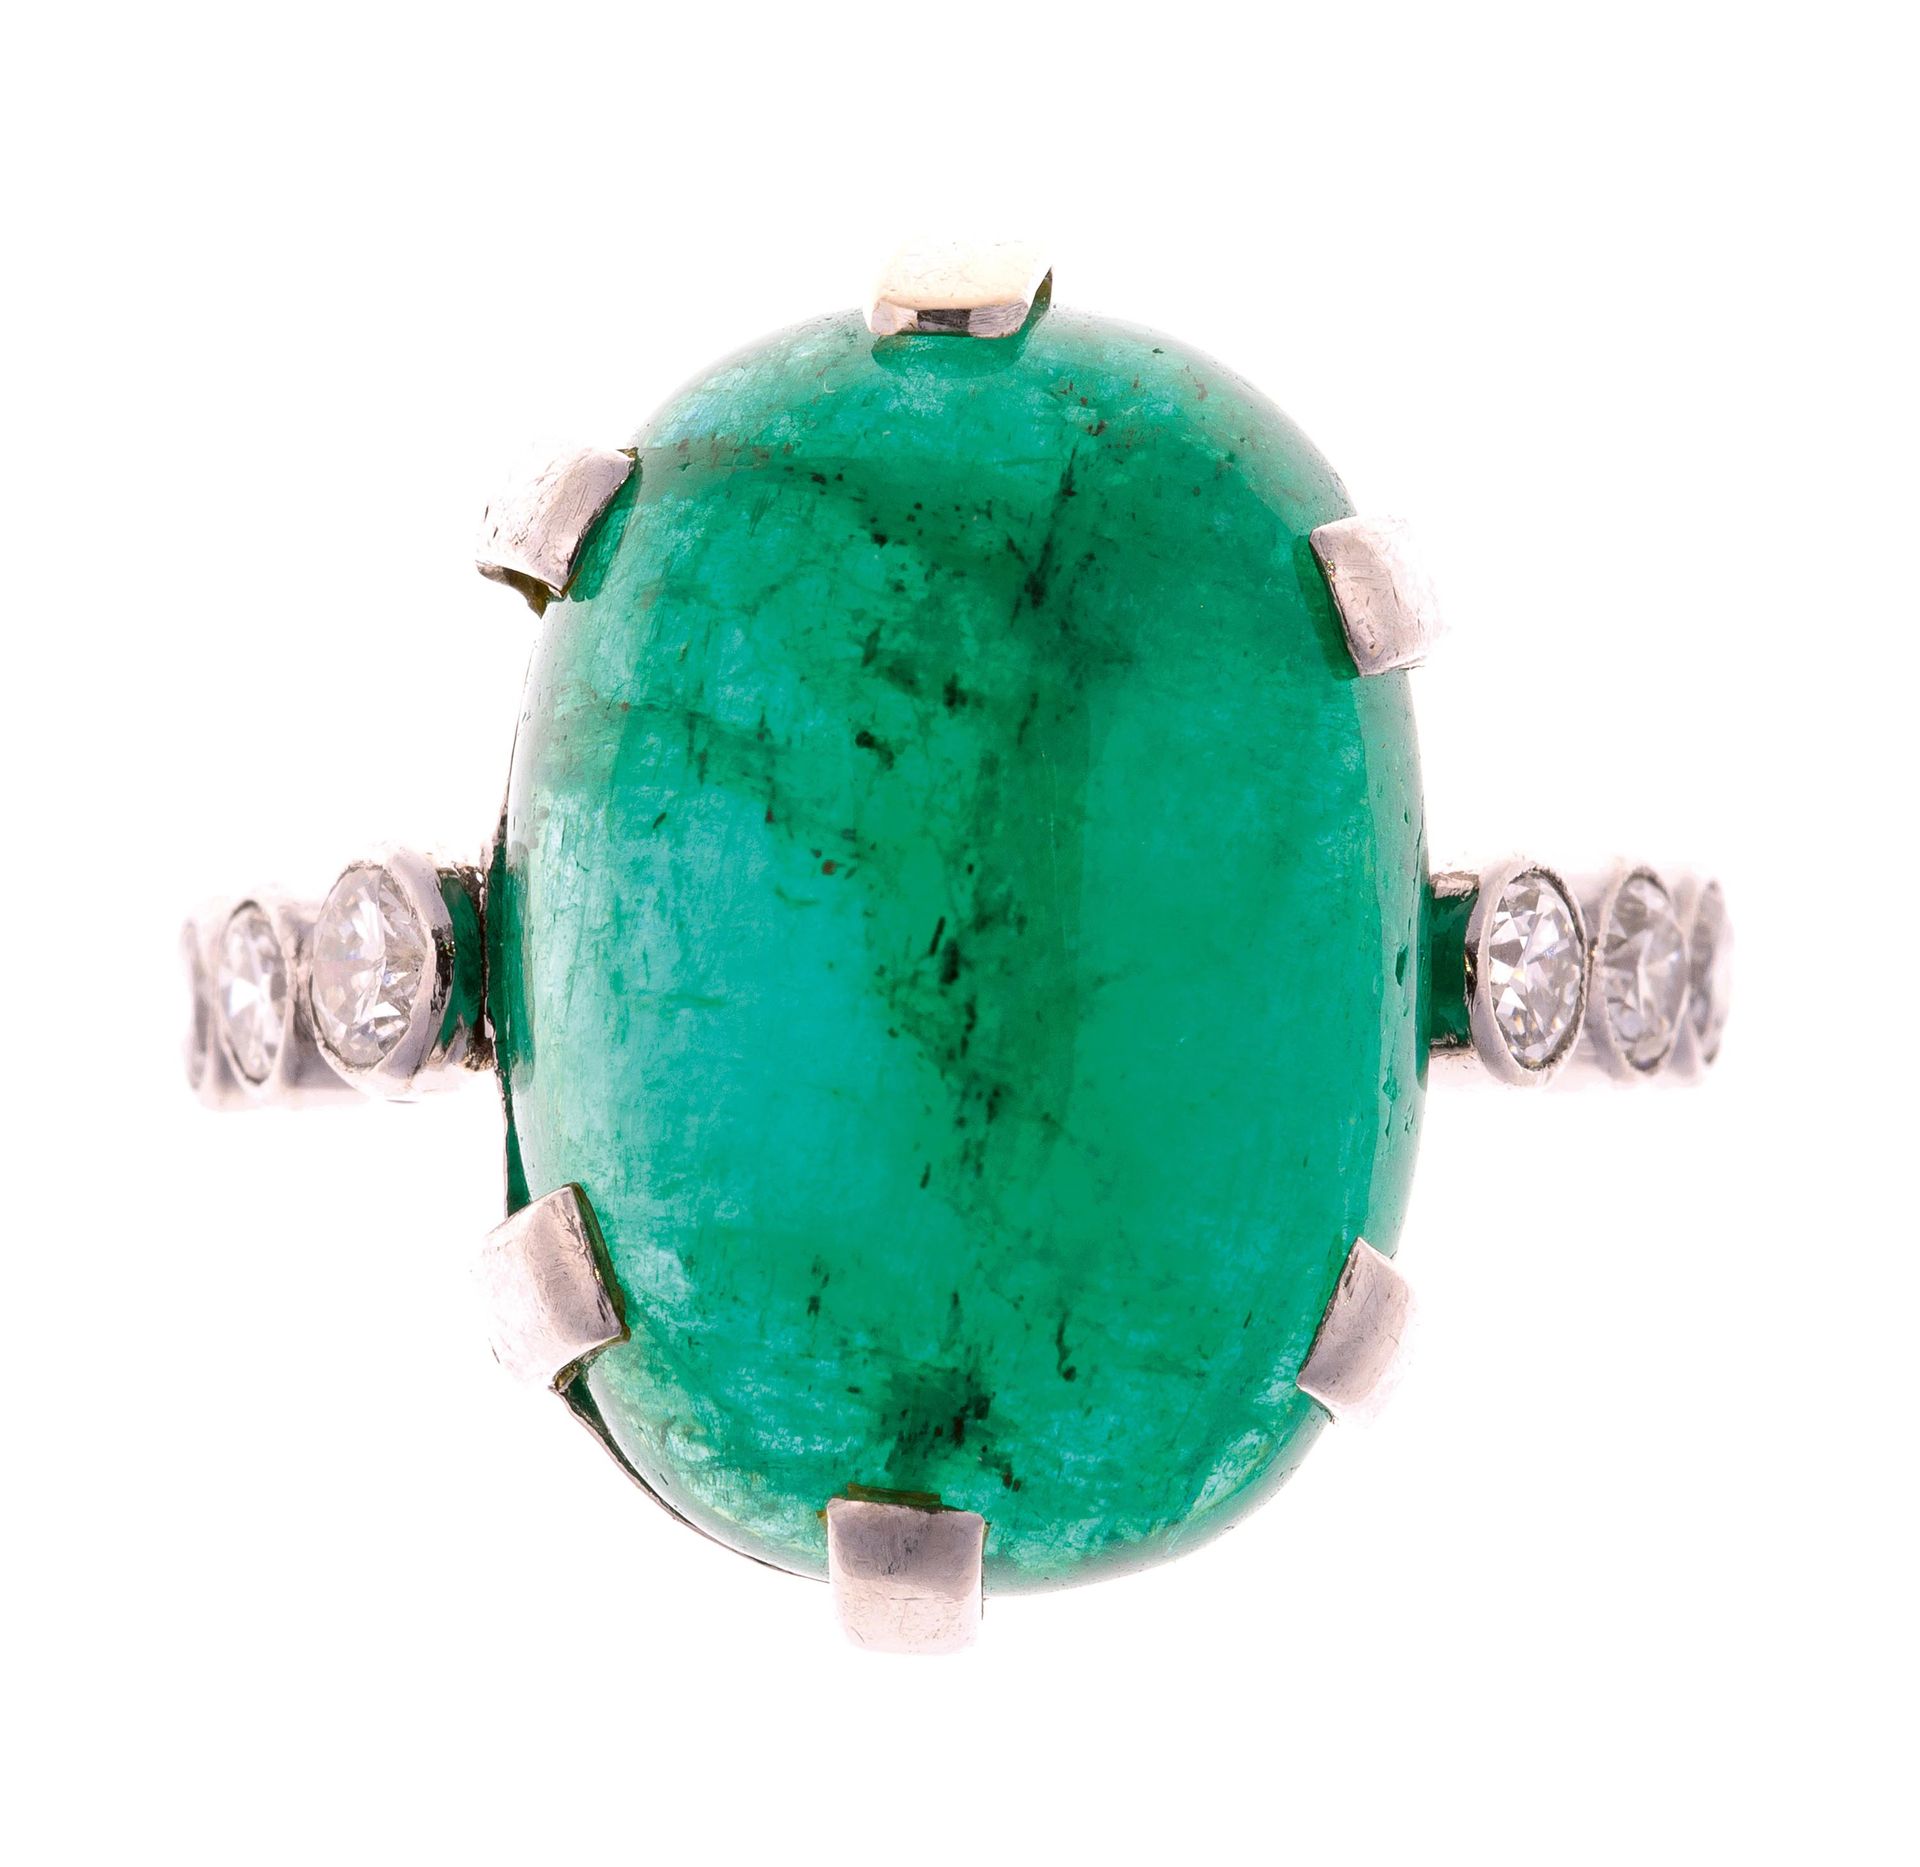 Null Gold ring set with a cabochon emerald and diamonds - Gross weight: 9 g